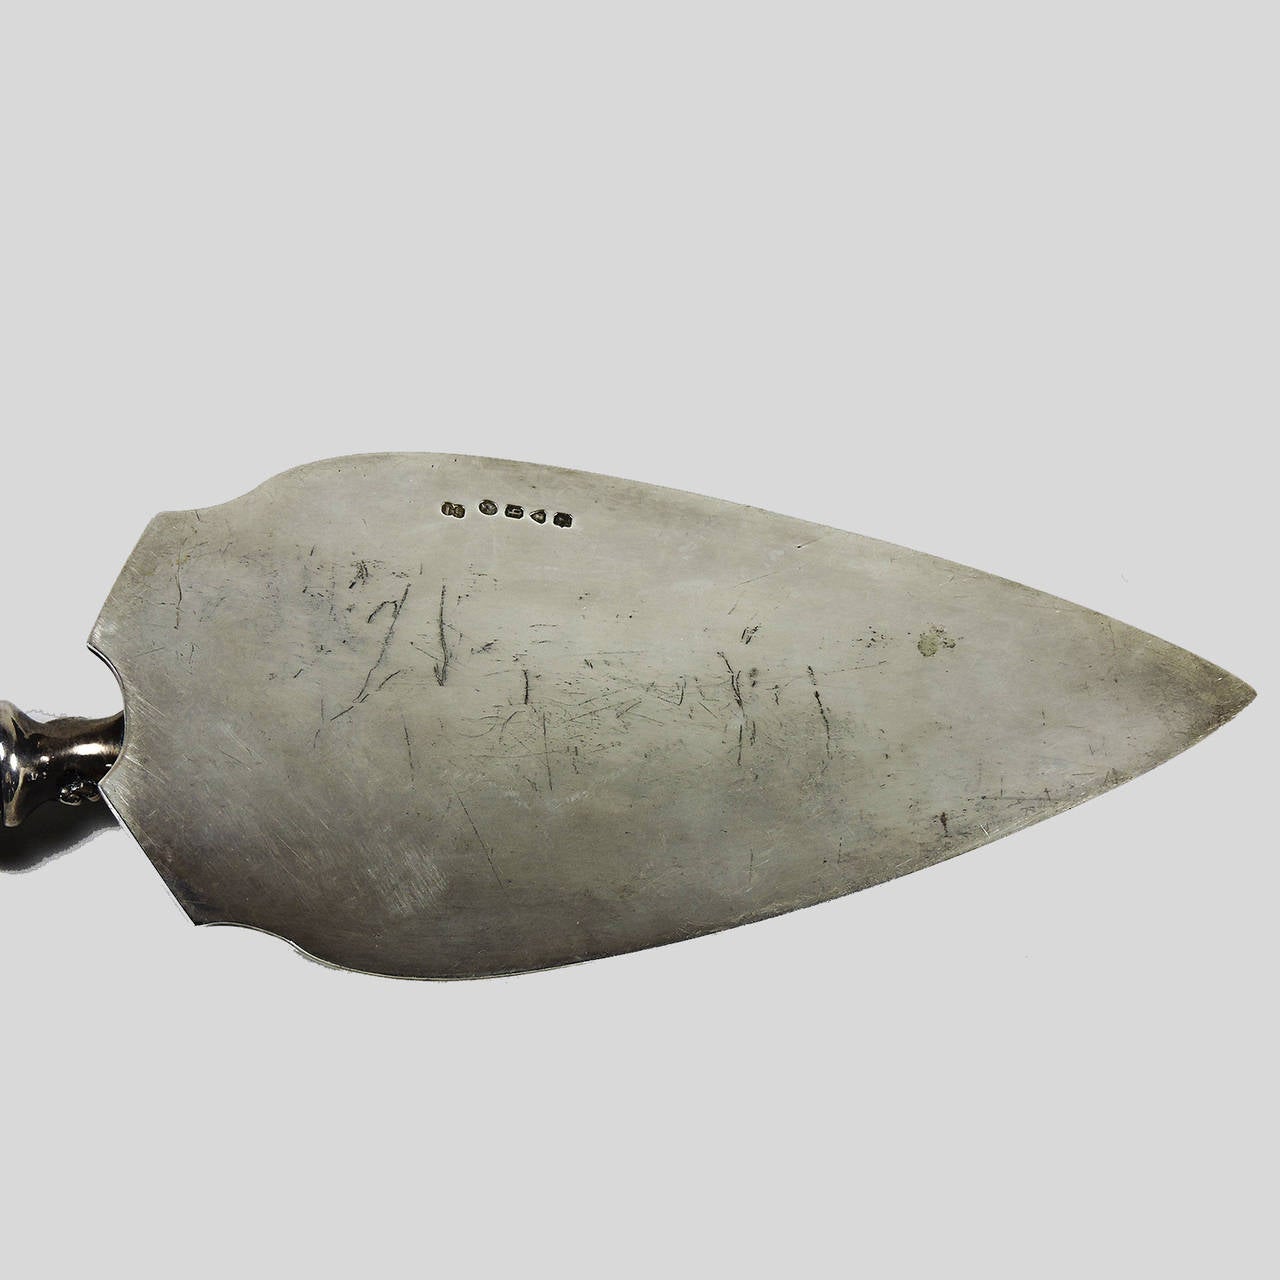 English silver bone handled presentation trowel, London, circa 1871. Bears maker's mark for Thomas Smily (act. 1858-1880), bears lion passant mark with lions head (sans crown) and date stamp for 1871. Engraved 